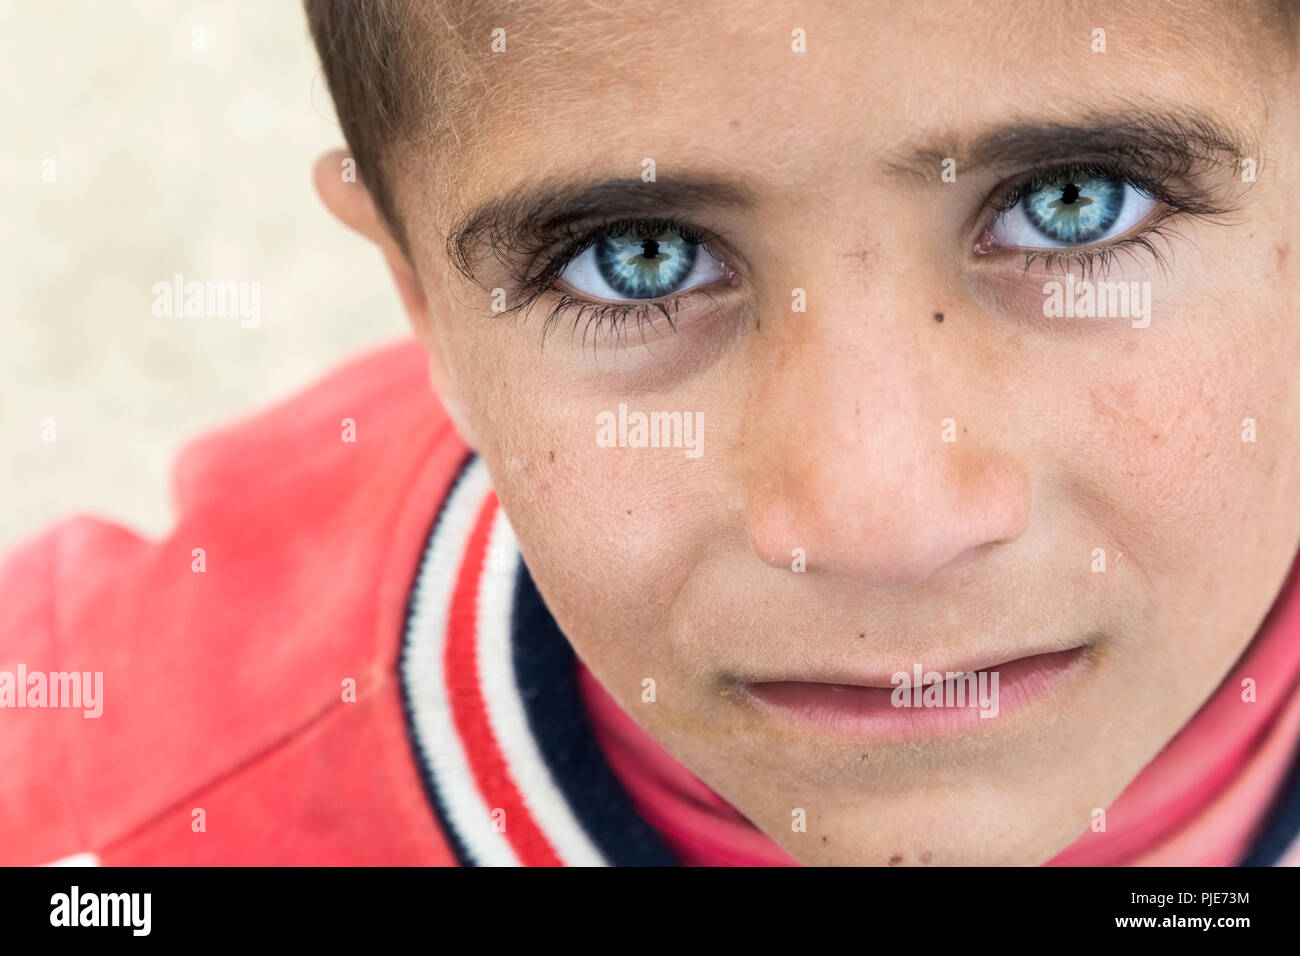 A child with deep strong look. Stock Photo